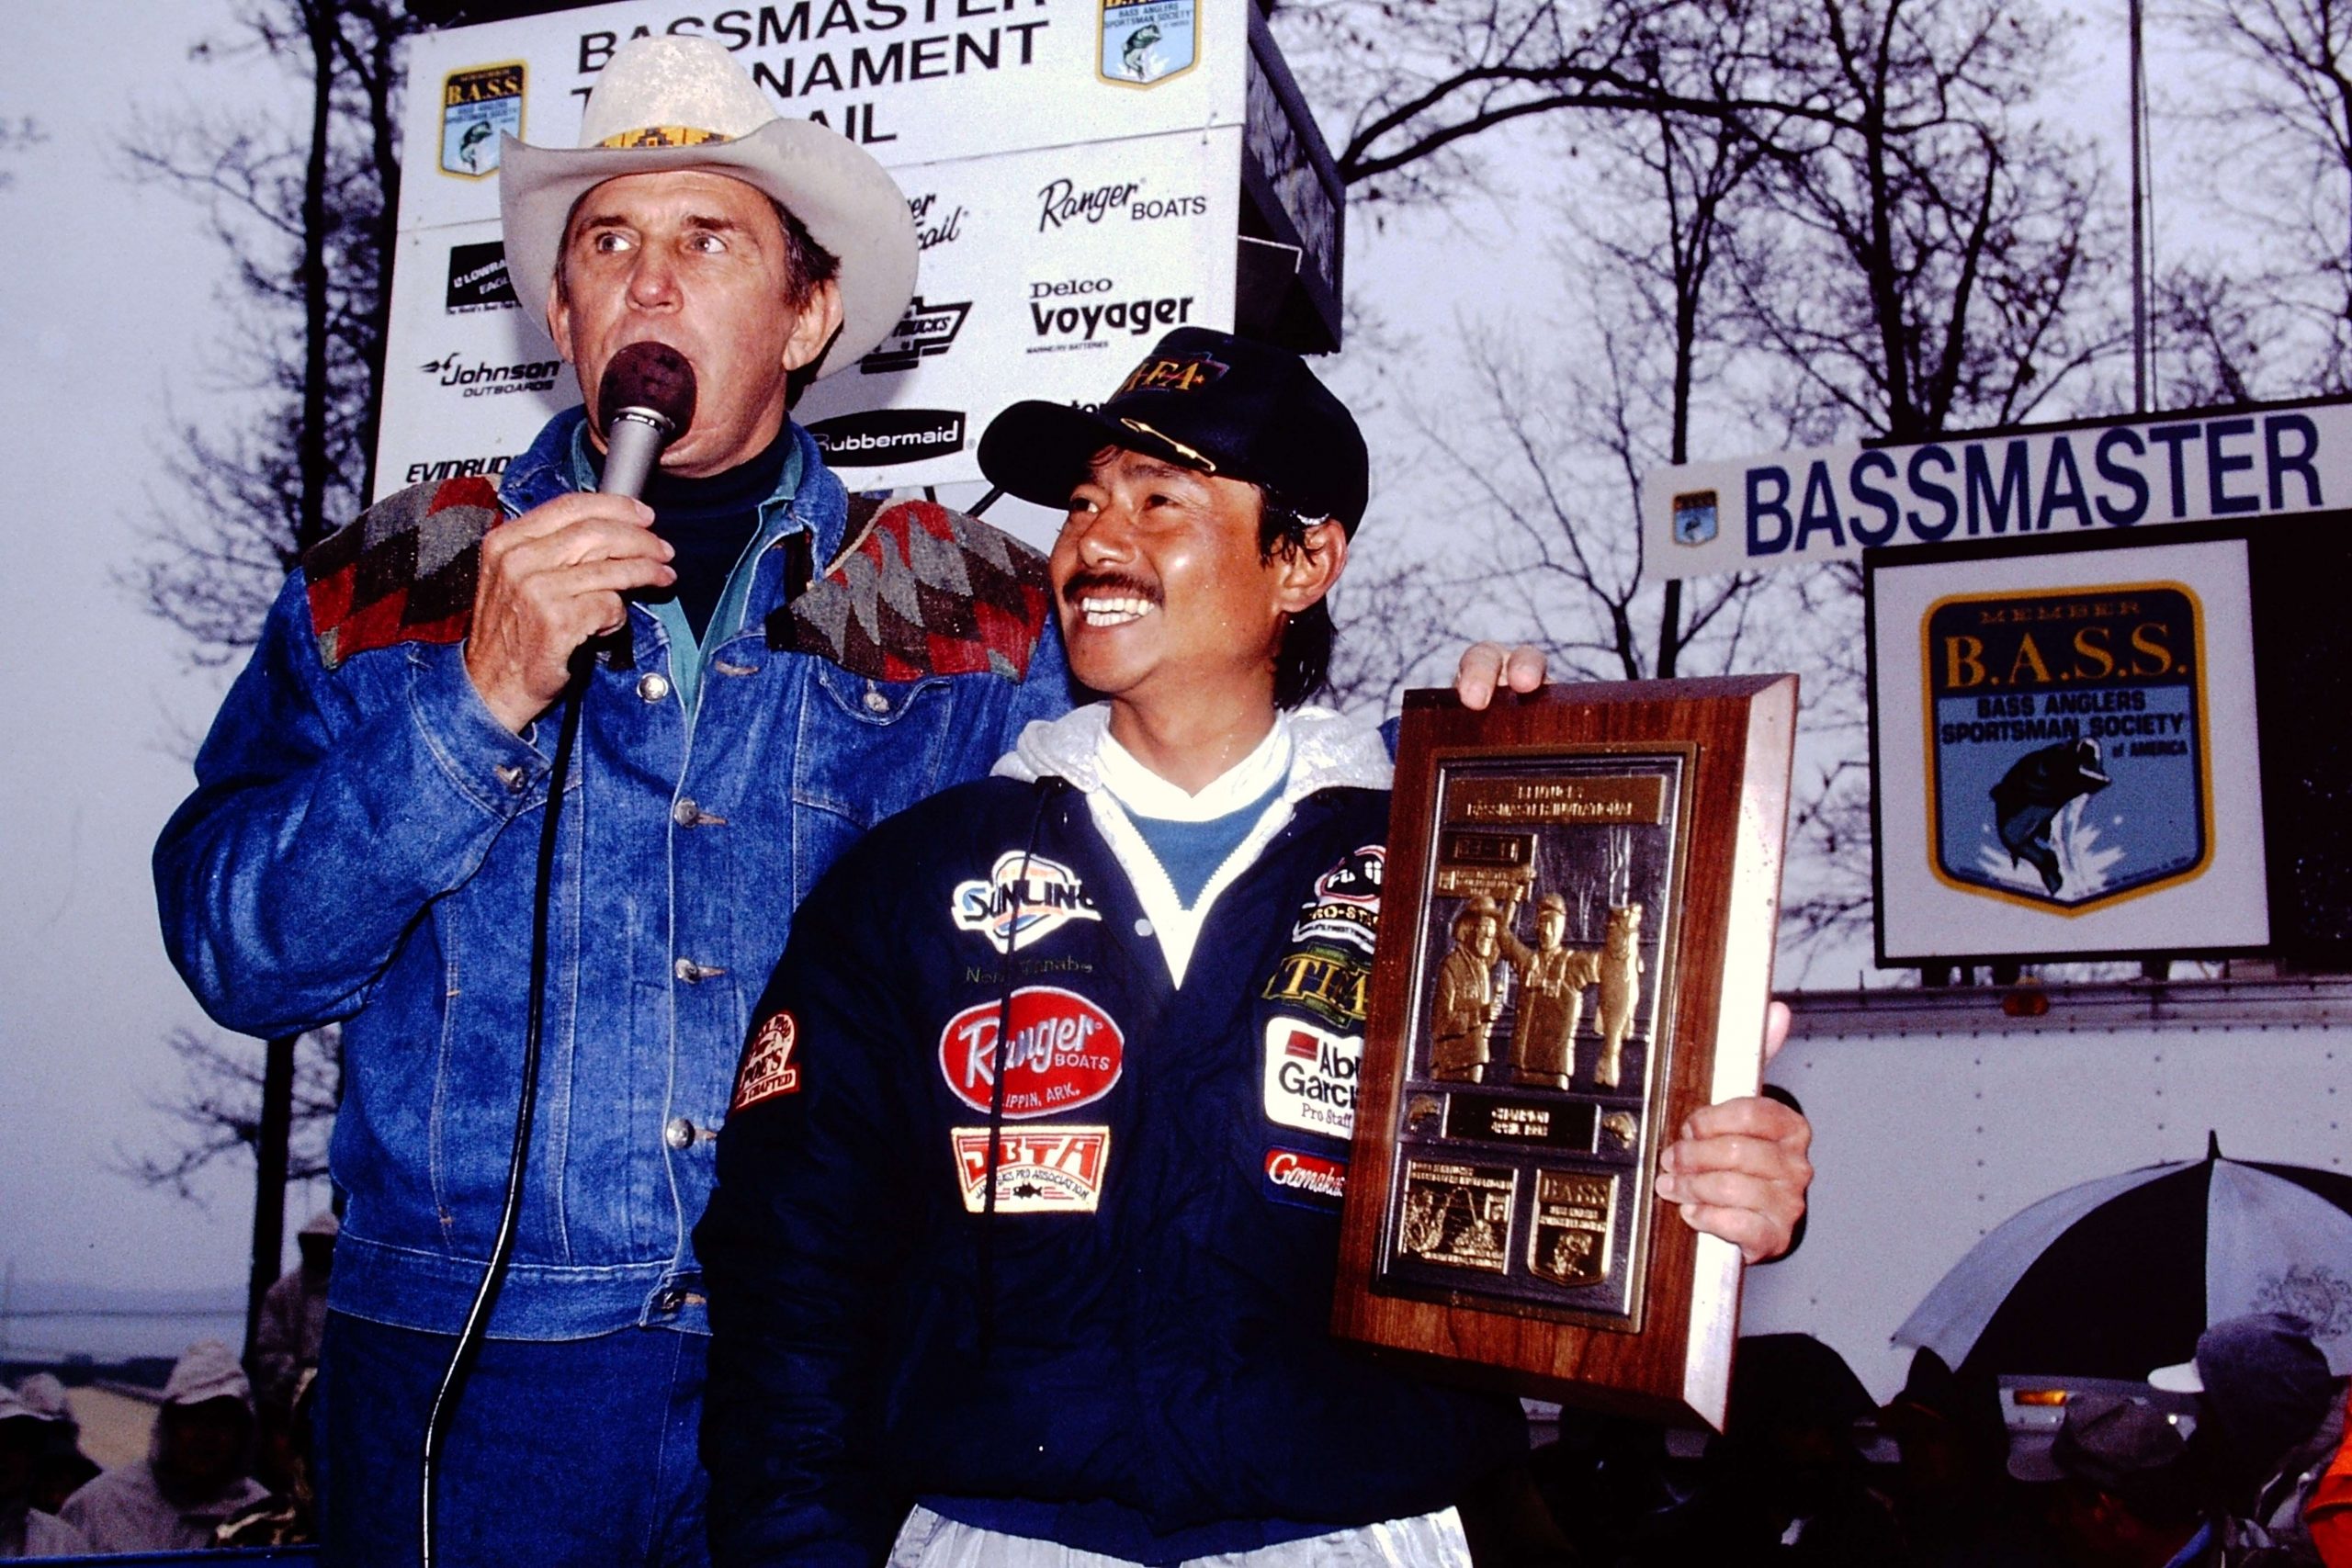 Due to illness, Ray Scott stayed off the stage during most of the final dayâs weigh-in, but he couldnât resist hopping on stage to introduce Tanabe as B.A.S.S.âs first international winner.